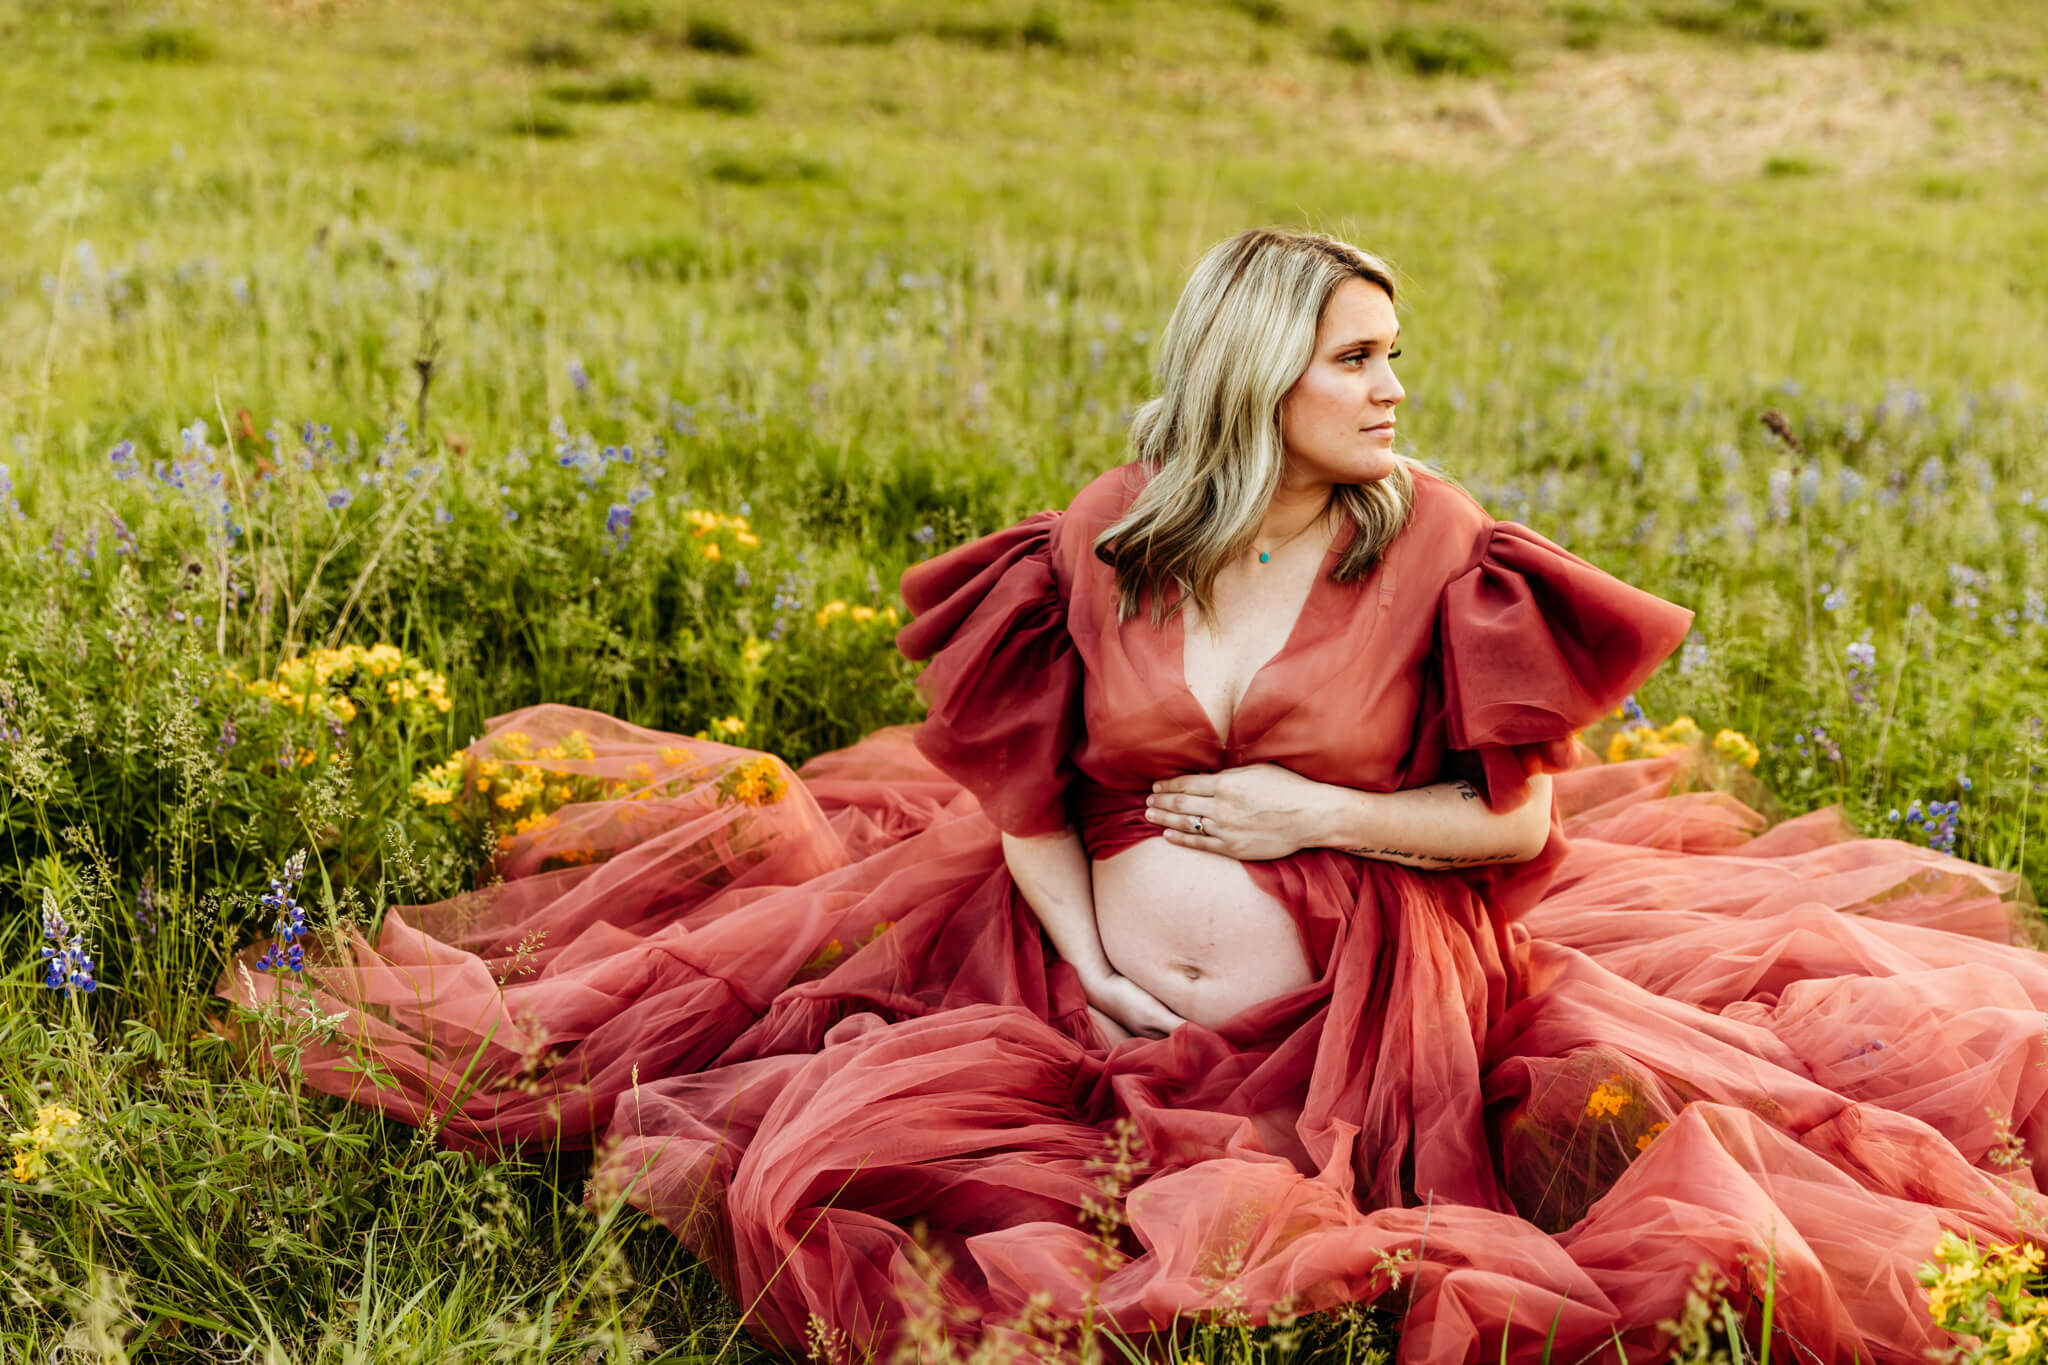 expecting mother holding her baby bump that's peeking through her robe as she looks out into the wildflower field